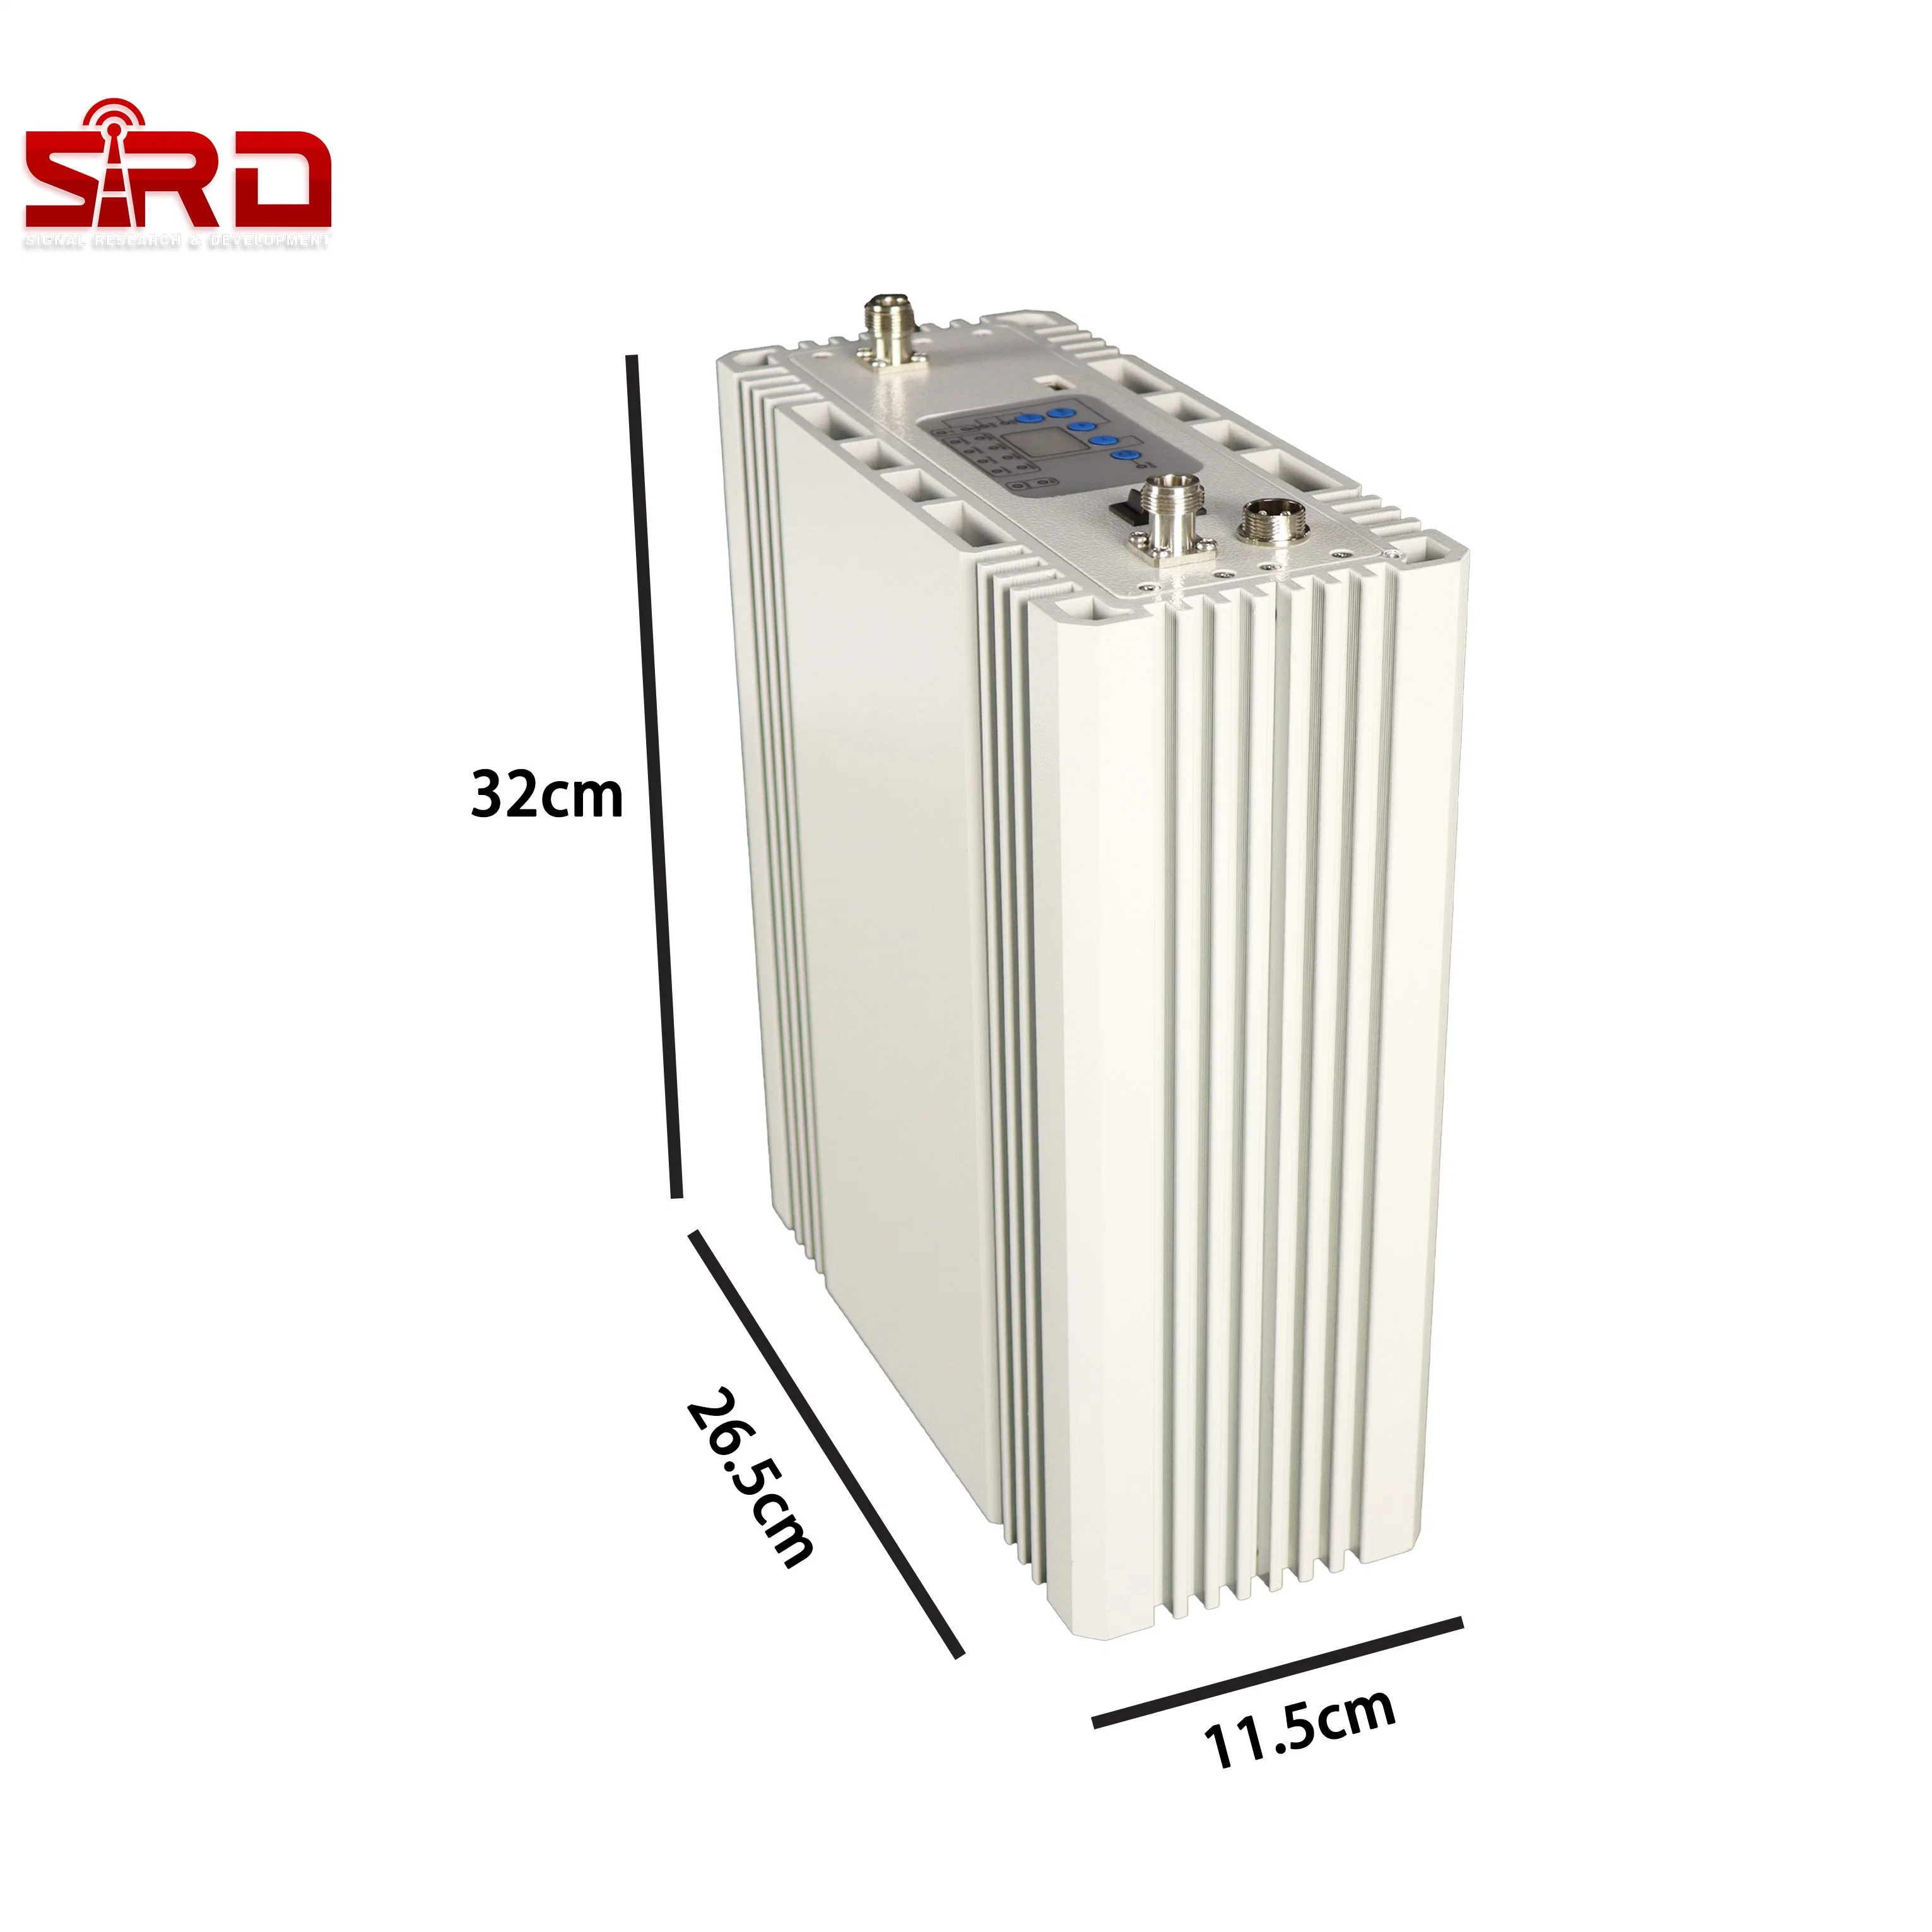 70dBm B1 B3 B8 Outdoor Indoor 20dBm Digital Wireless Ics Band Selective Repeater Signal Booster Amplifier